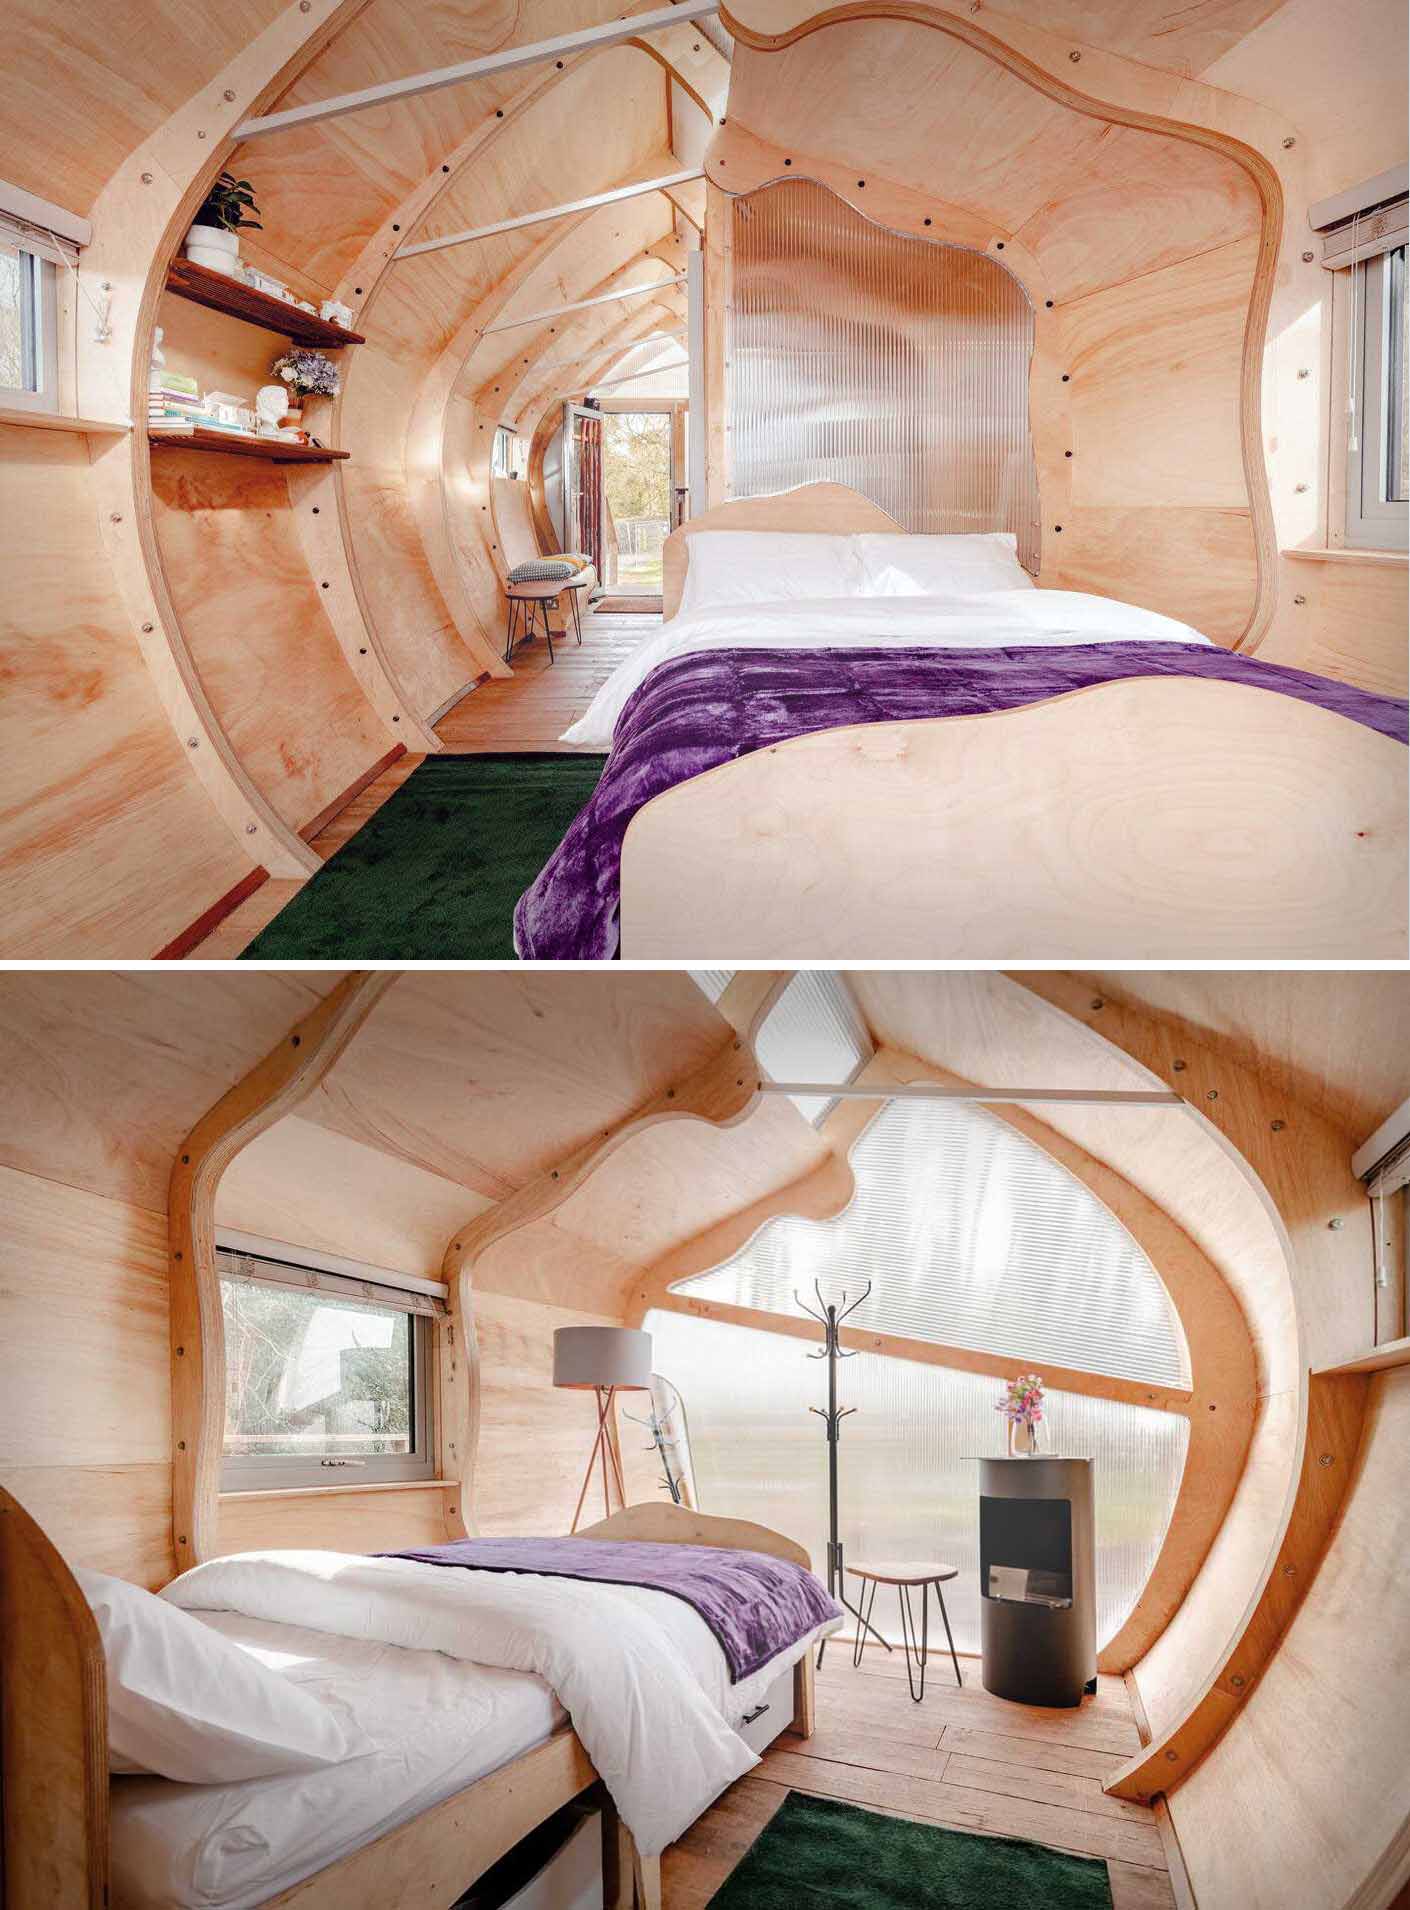 A small ،ically shaped cabin clad in wood ،ngles.